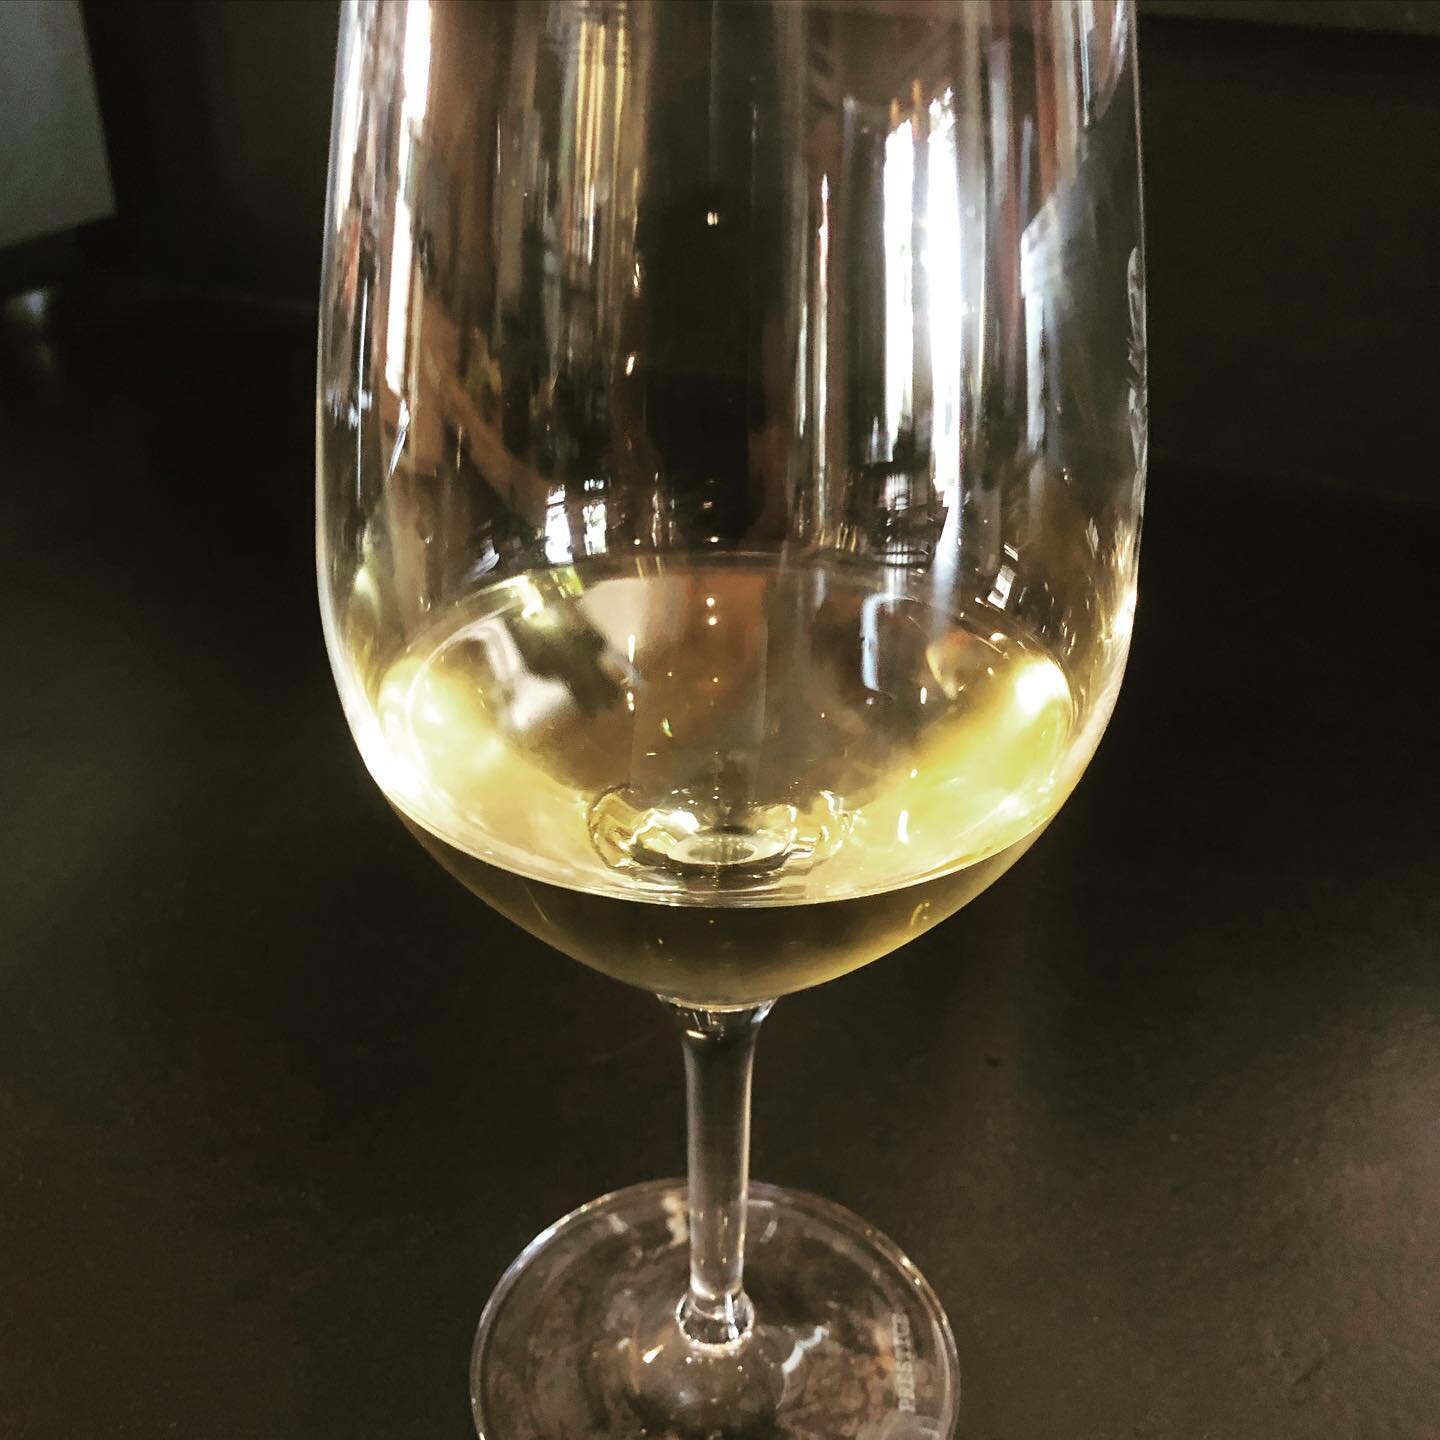 We&rsquo;re really looking forward to our Chardonnay tasting this Saturday, the 19th at 1:30. We have just a few seats still available and reservations are required. We will taste four different styles of Chardonnay at different price points for $20 